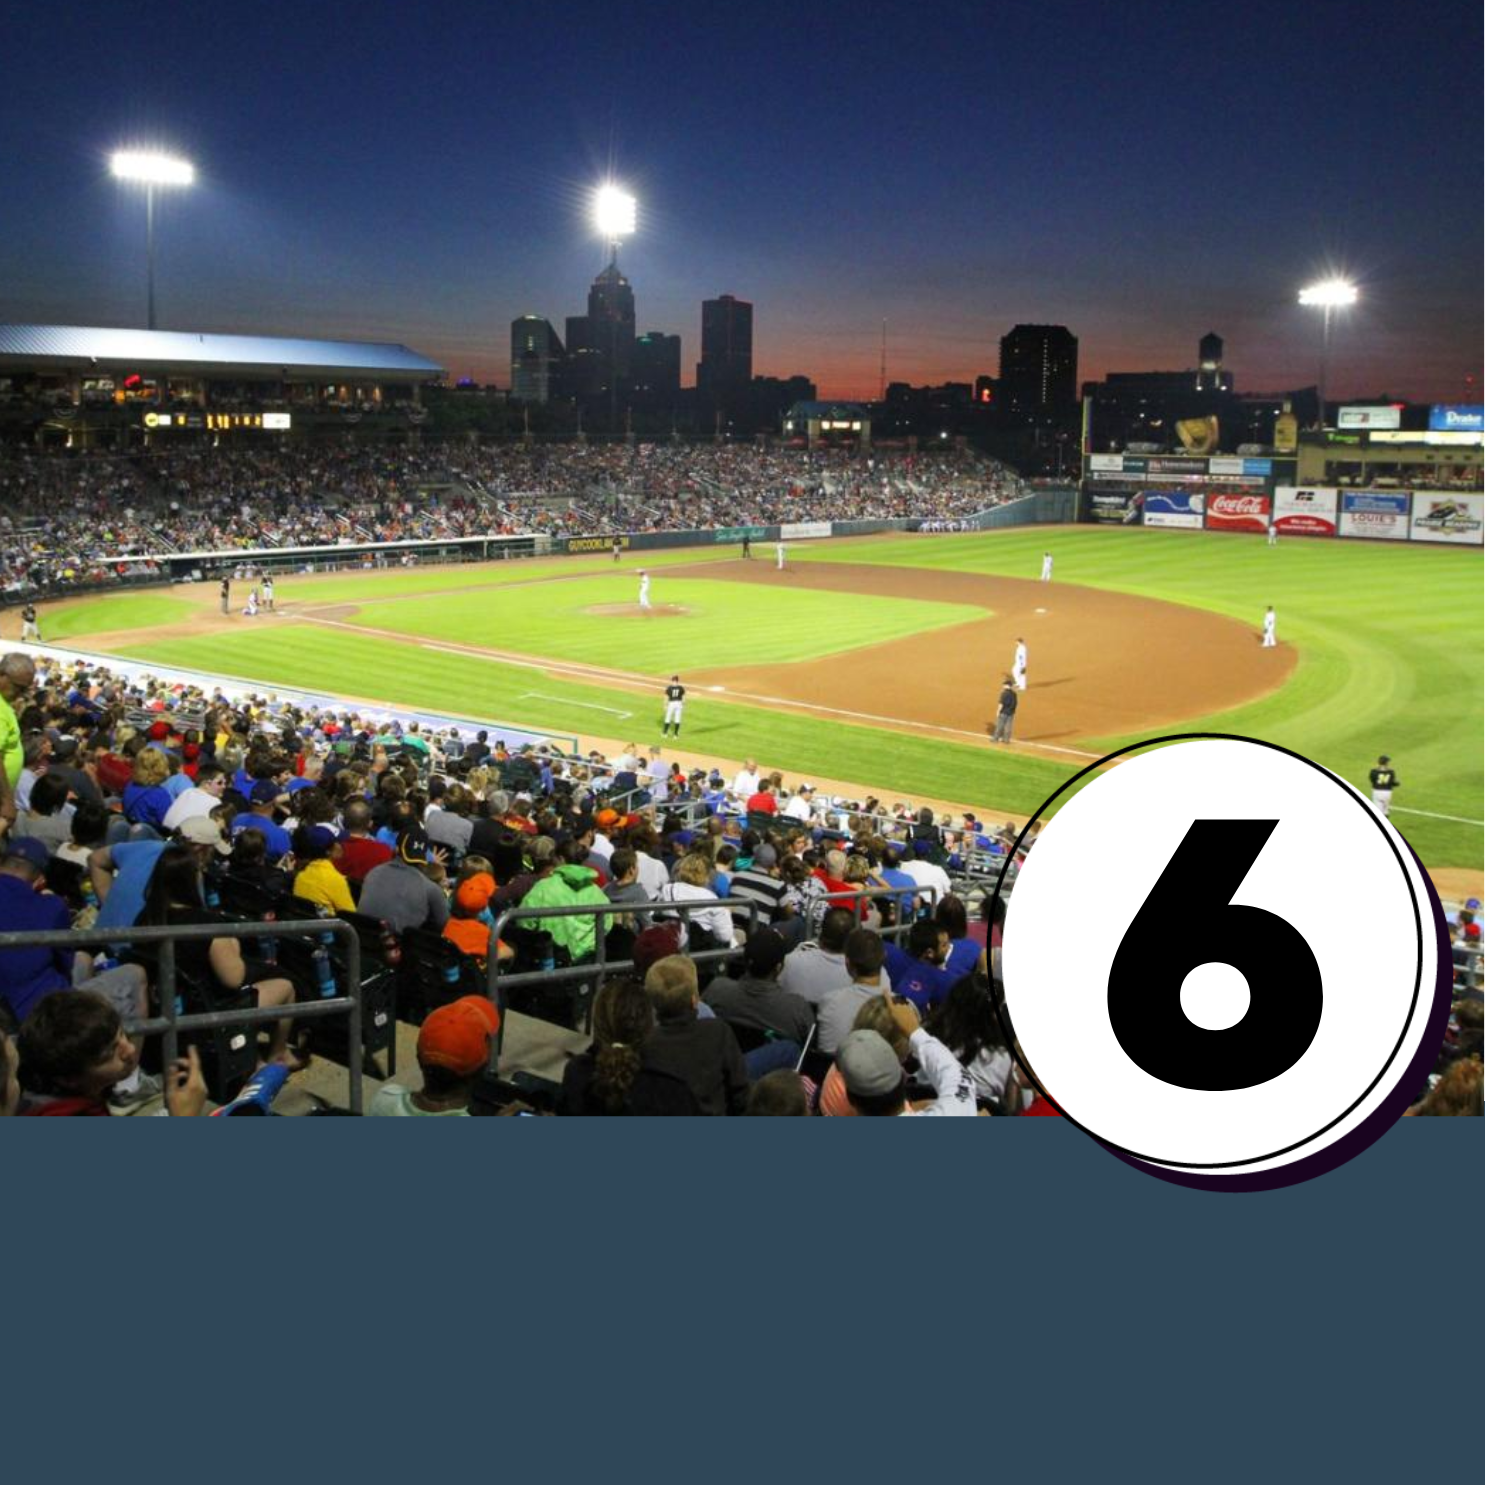 Invite Your Neighbor to an Iowa Cubs Game